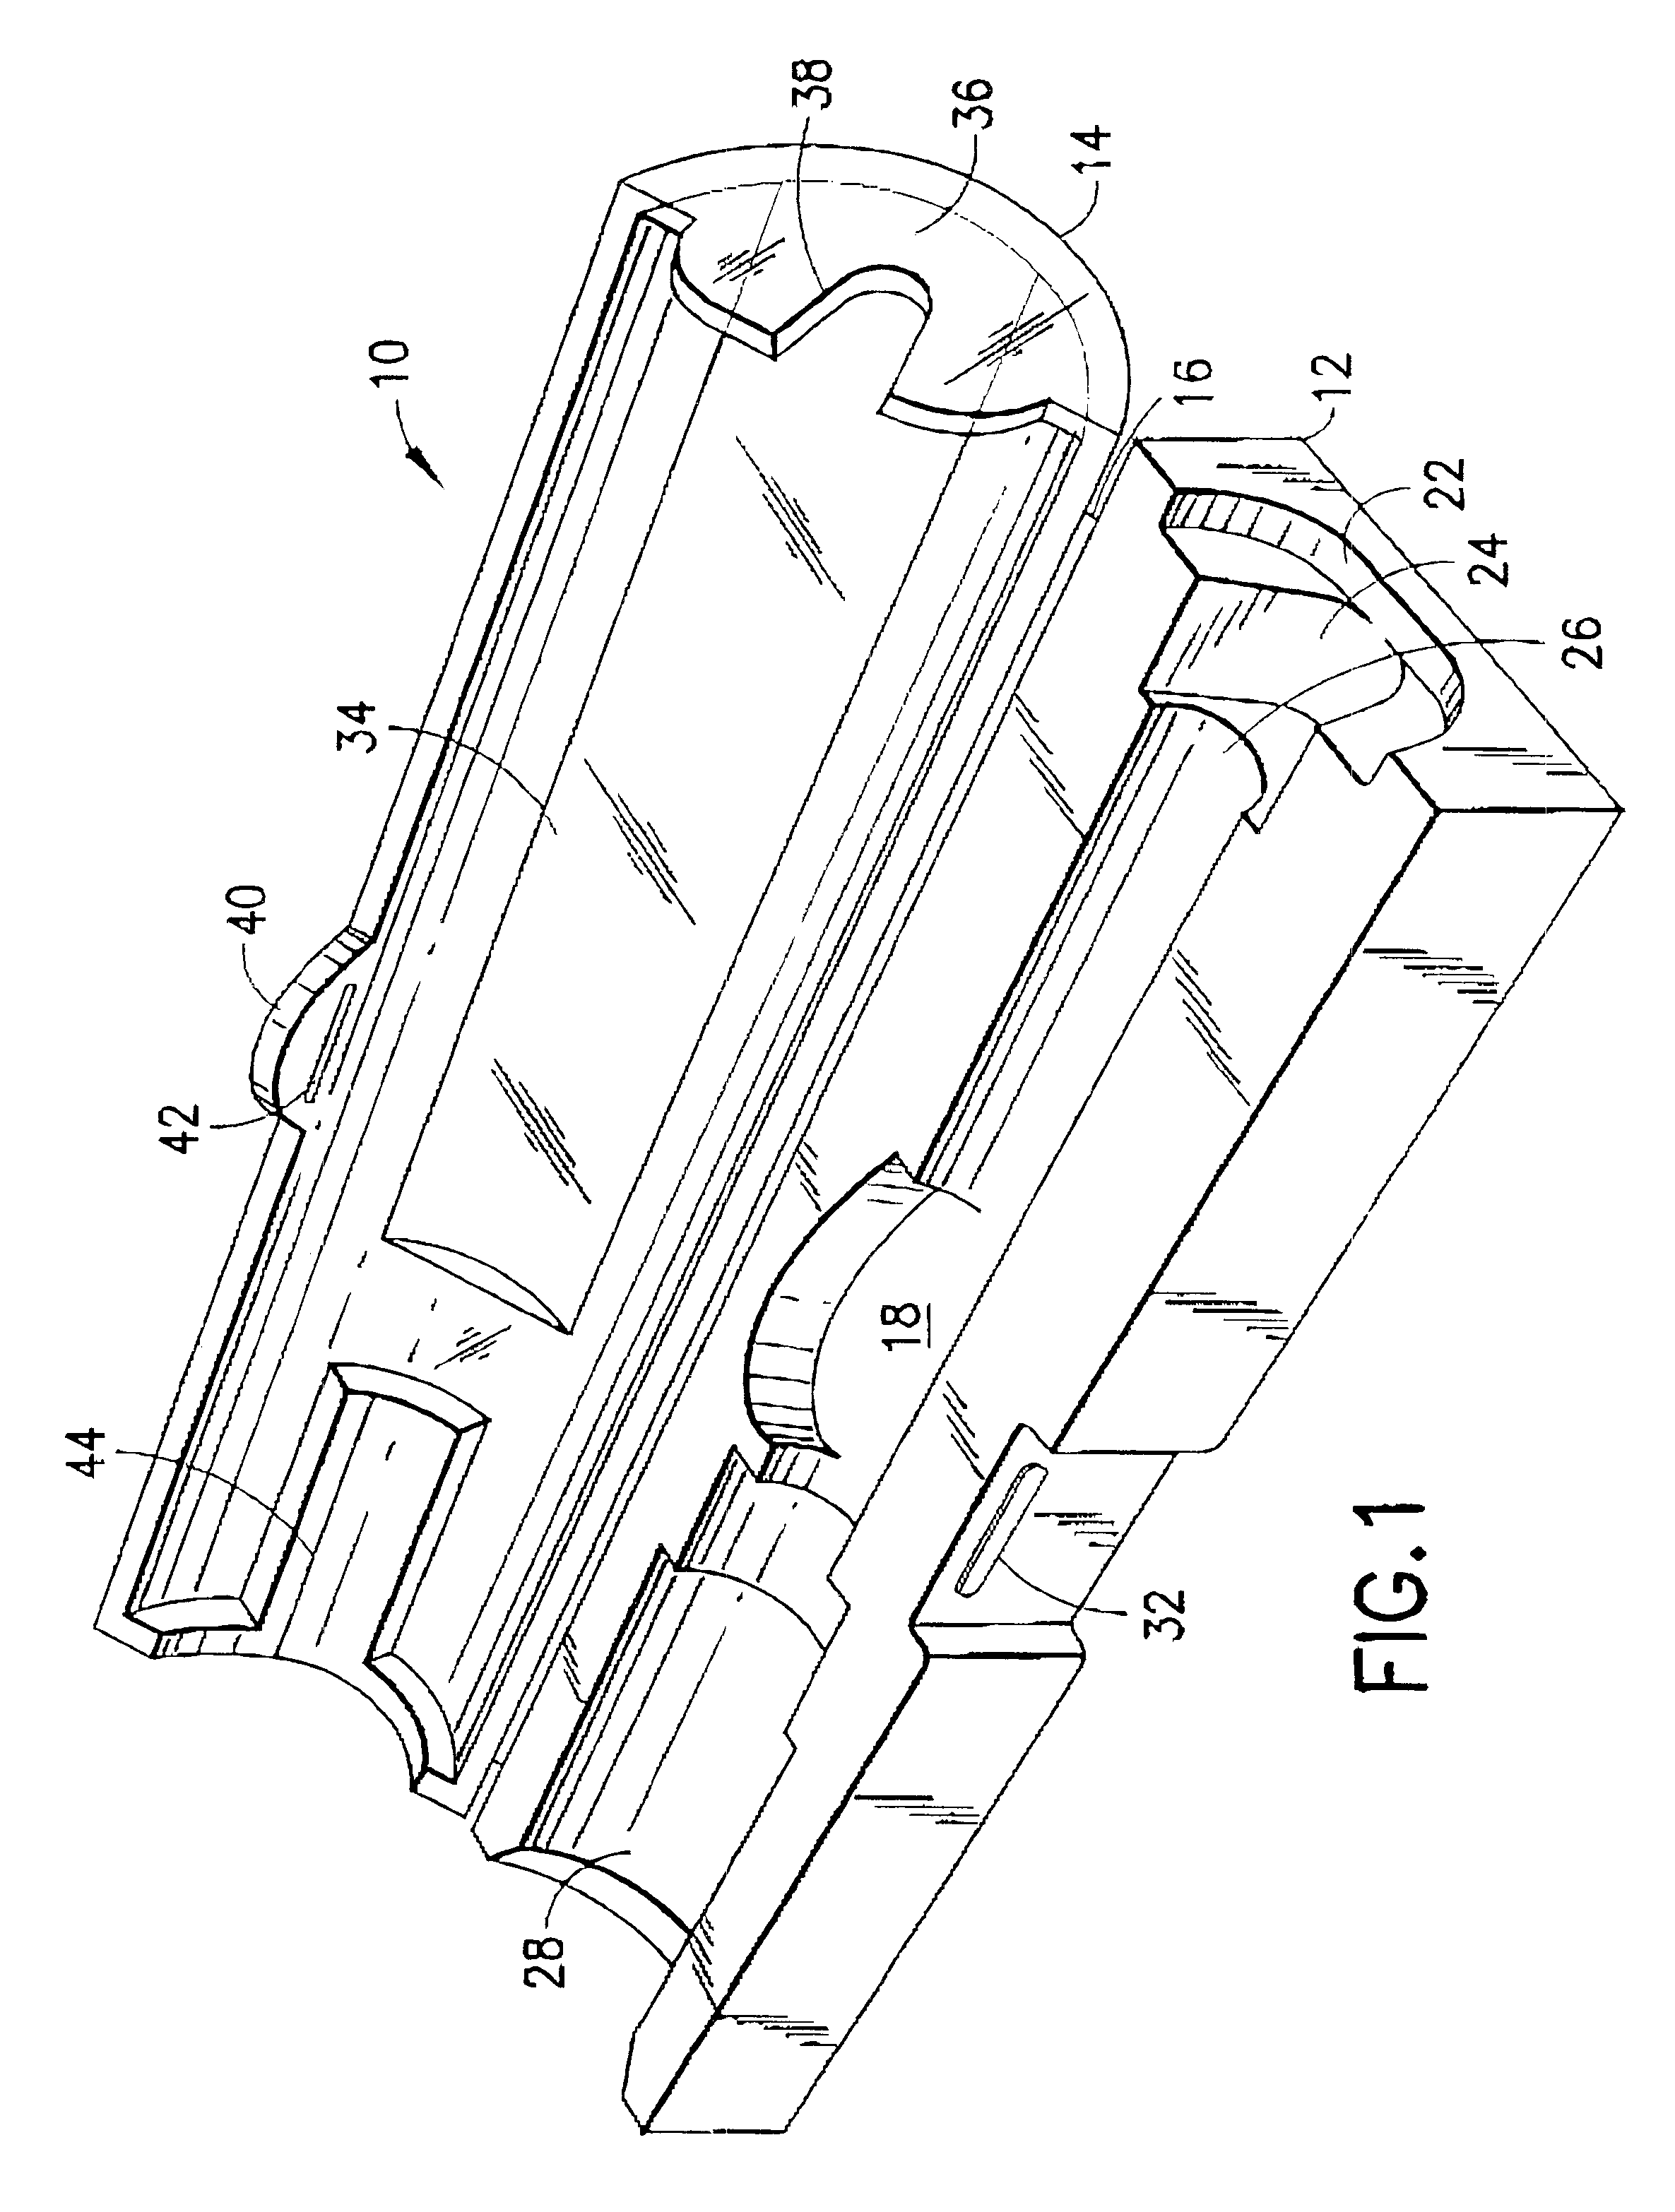 Kit for loading and disposal of hypodermic syringes used for administering medication